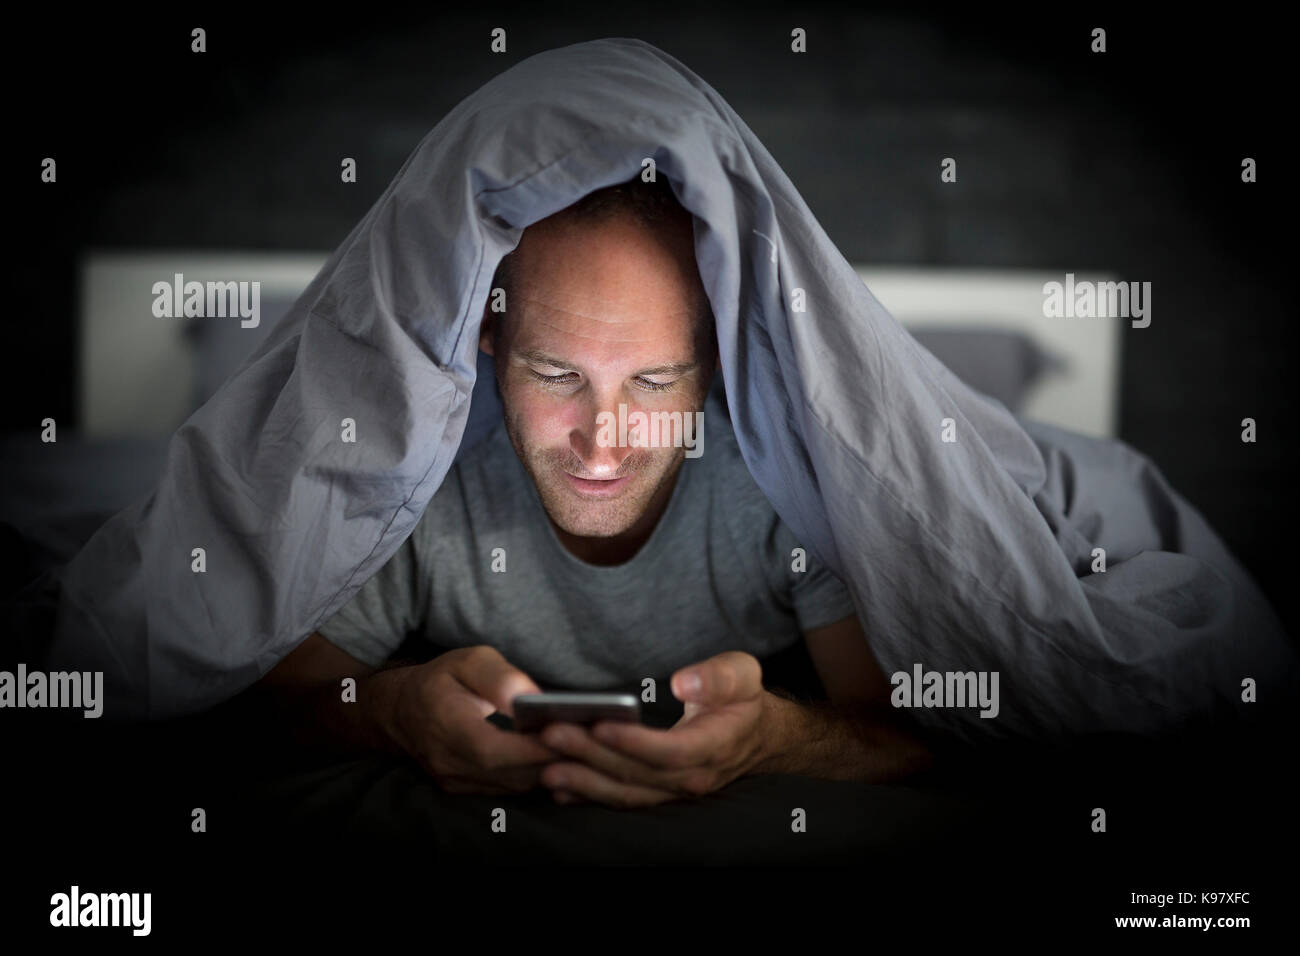 young cell phone addict man awake late at night in bed using smartphone Stock Photo